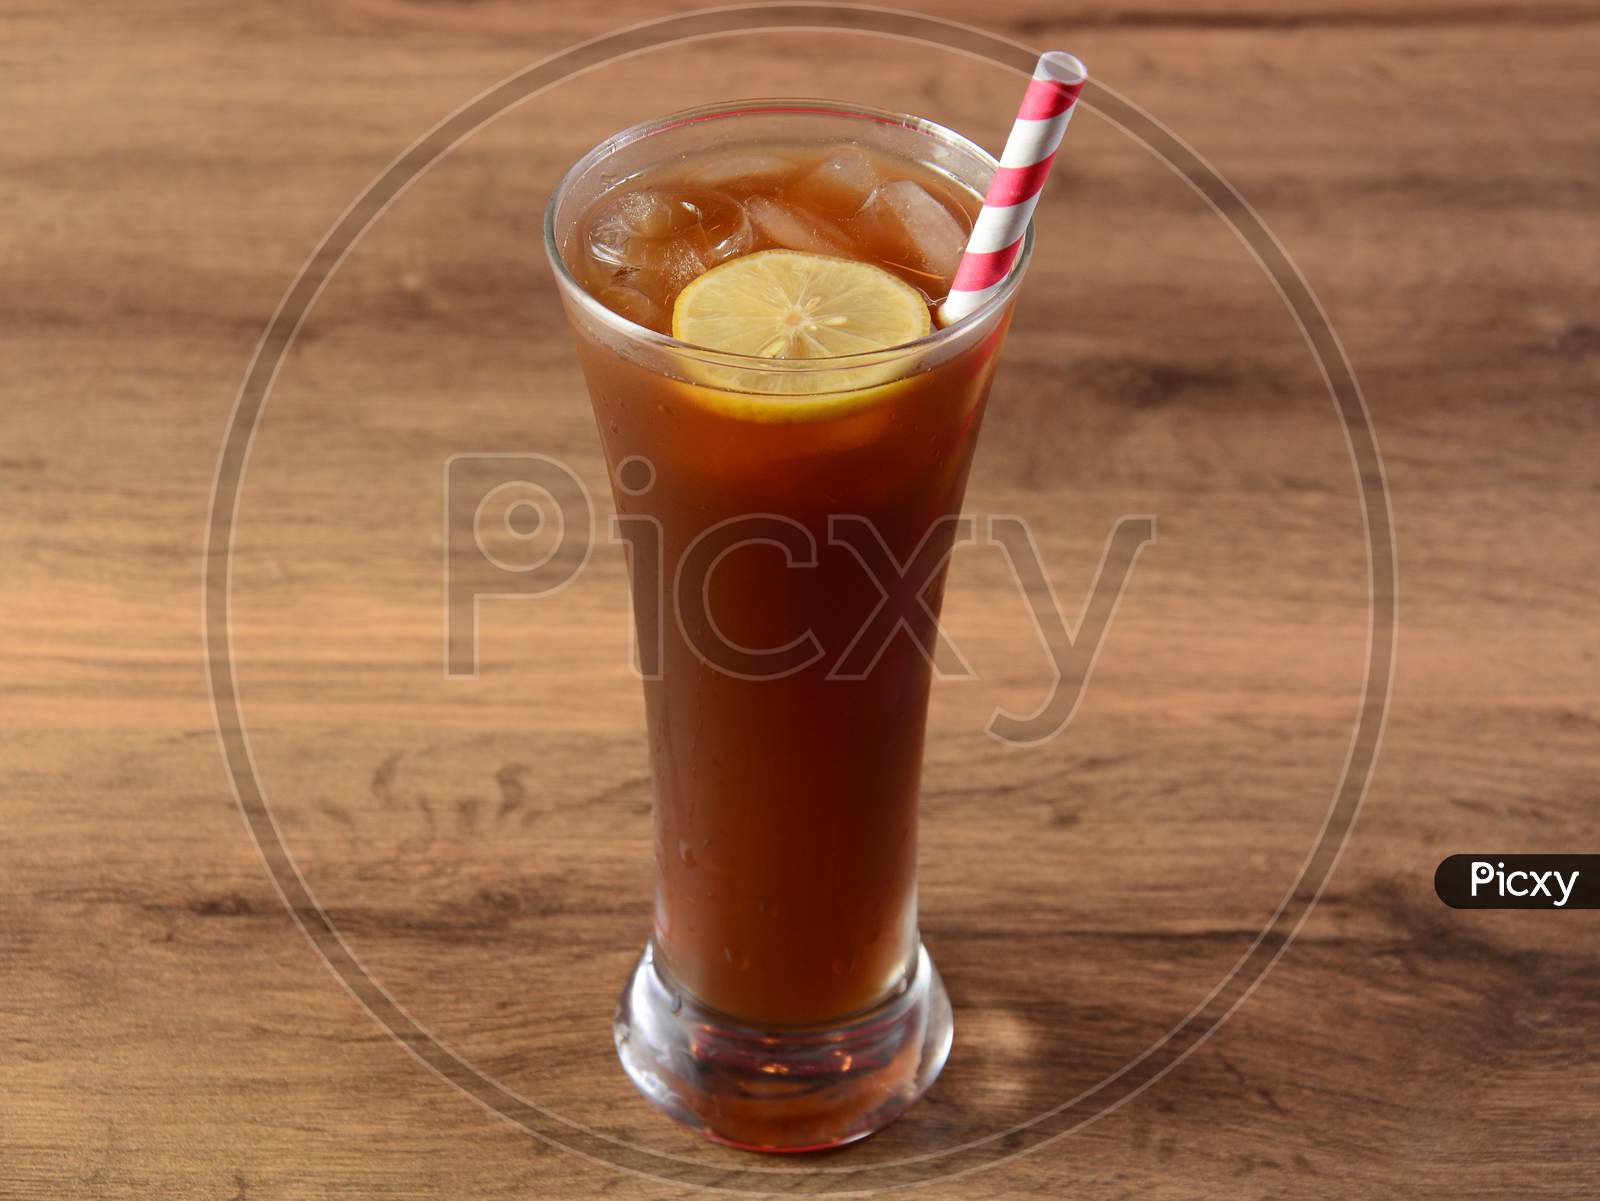 Traditional Iced Tea In A Glass With Lemon And Paper Straws On A Rustic Wooden Background.